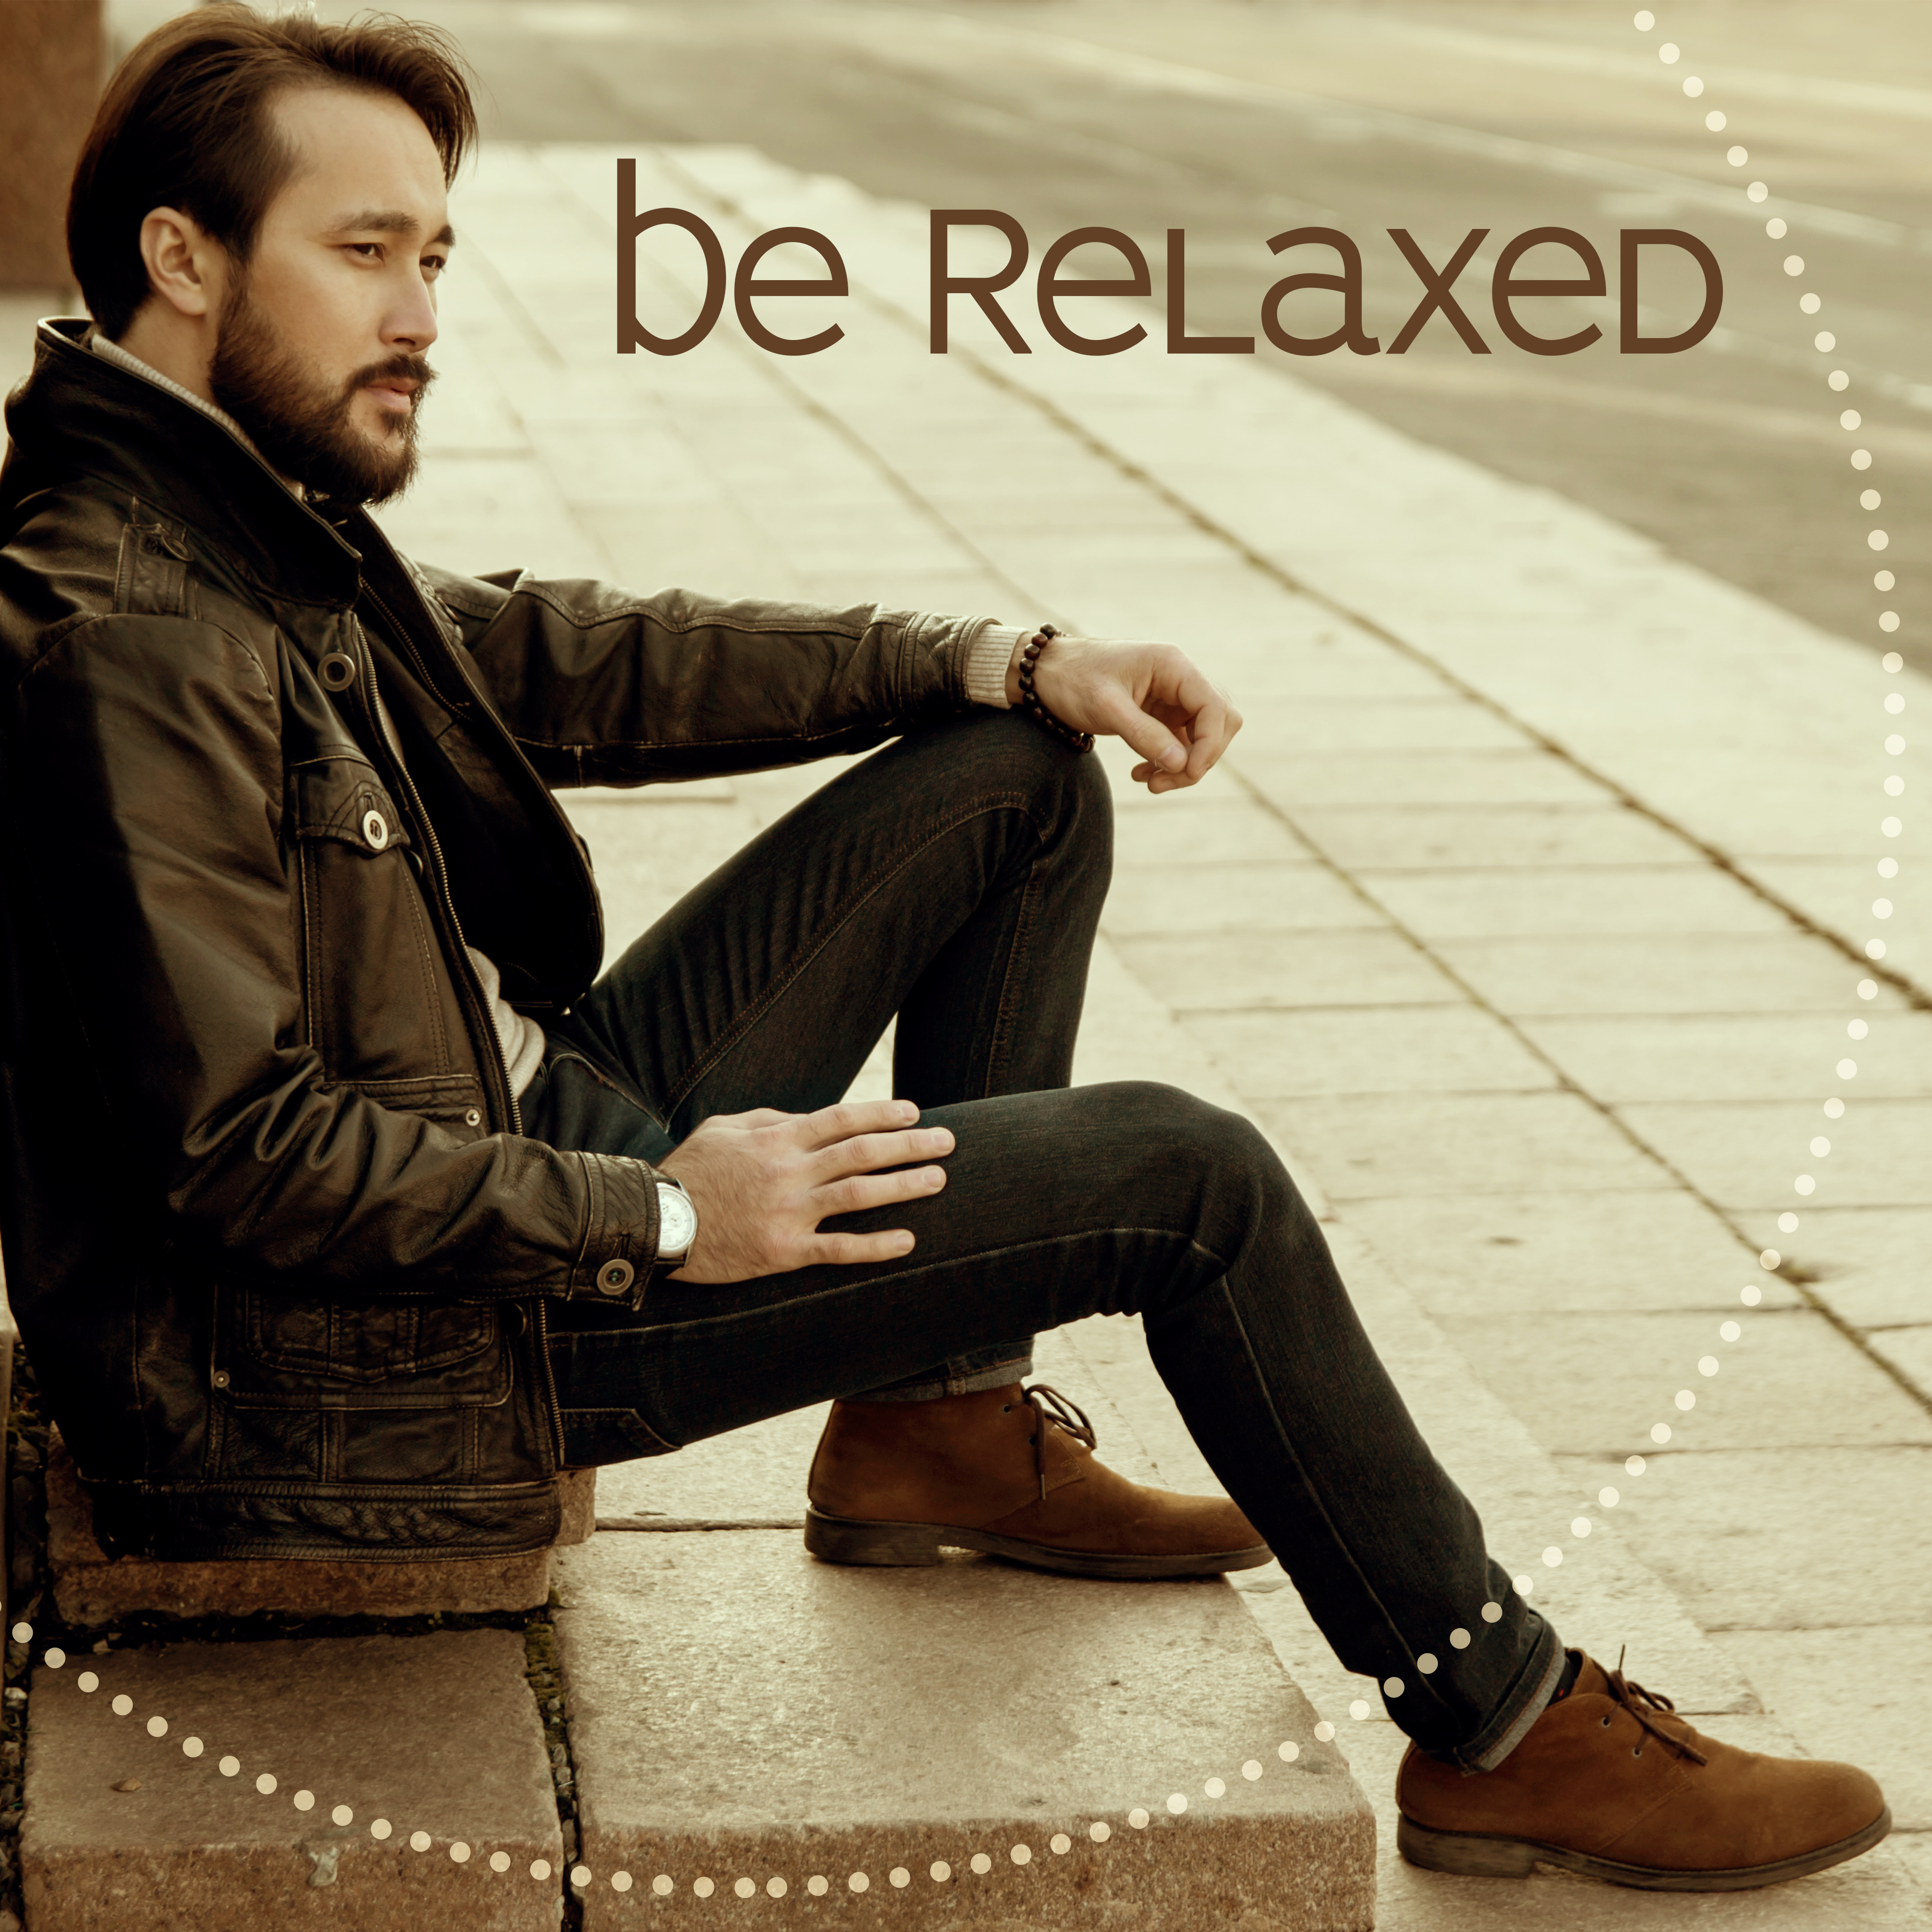 Be Relaxed – Peaceful Nature Songs for Deep Relax, Sleep, Spa, Massage, Restful Time at Home